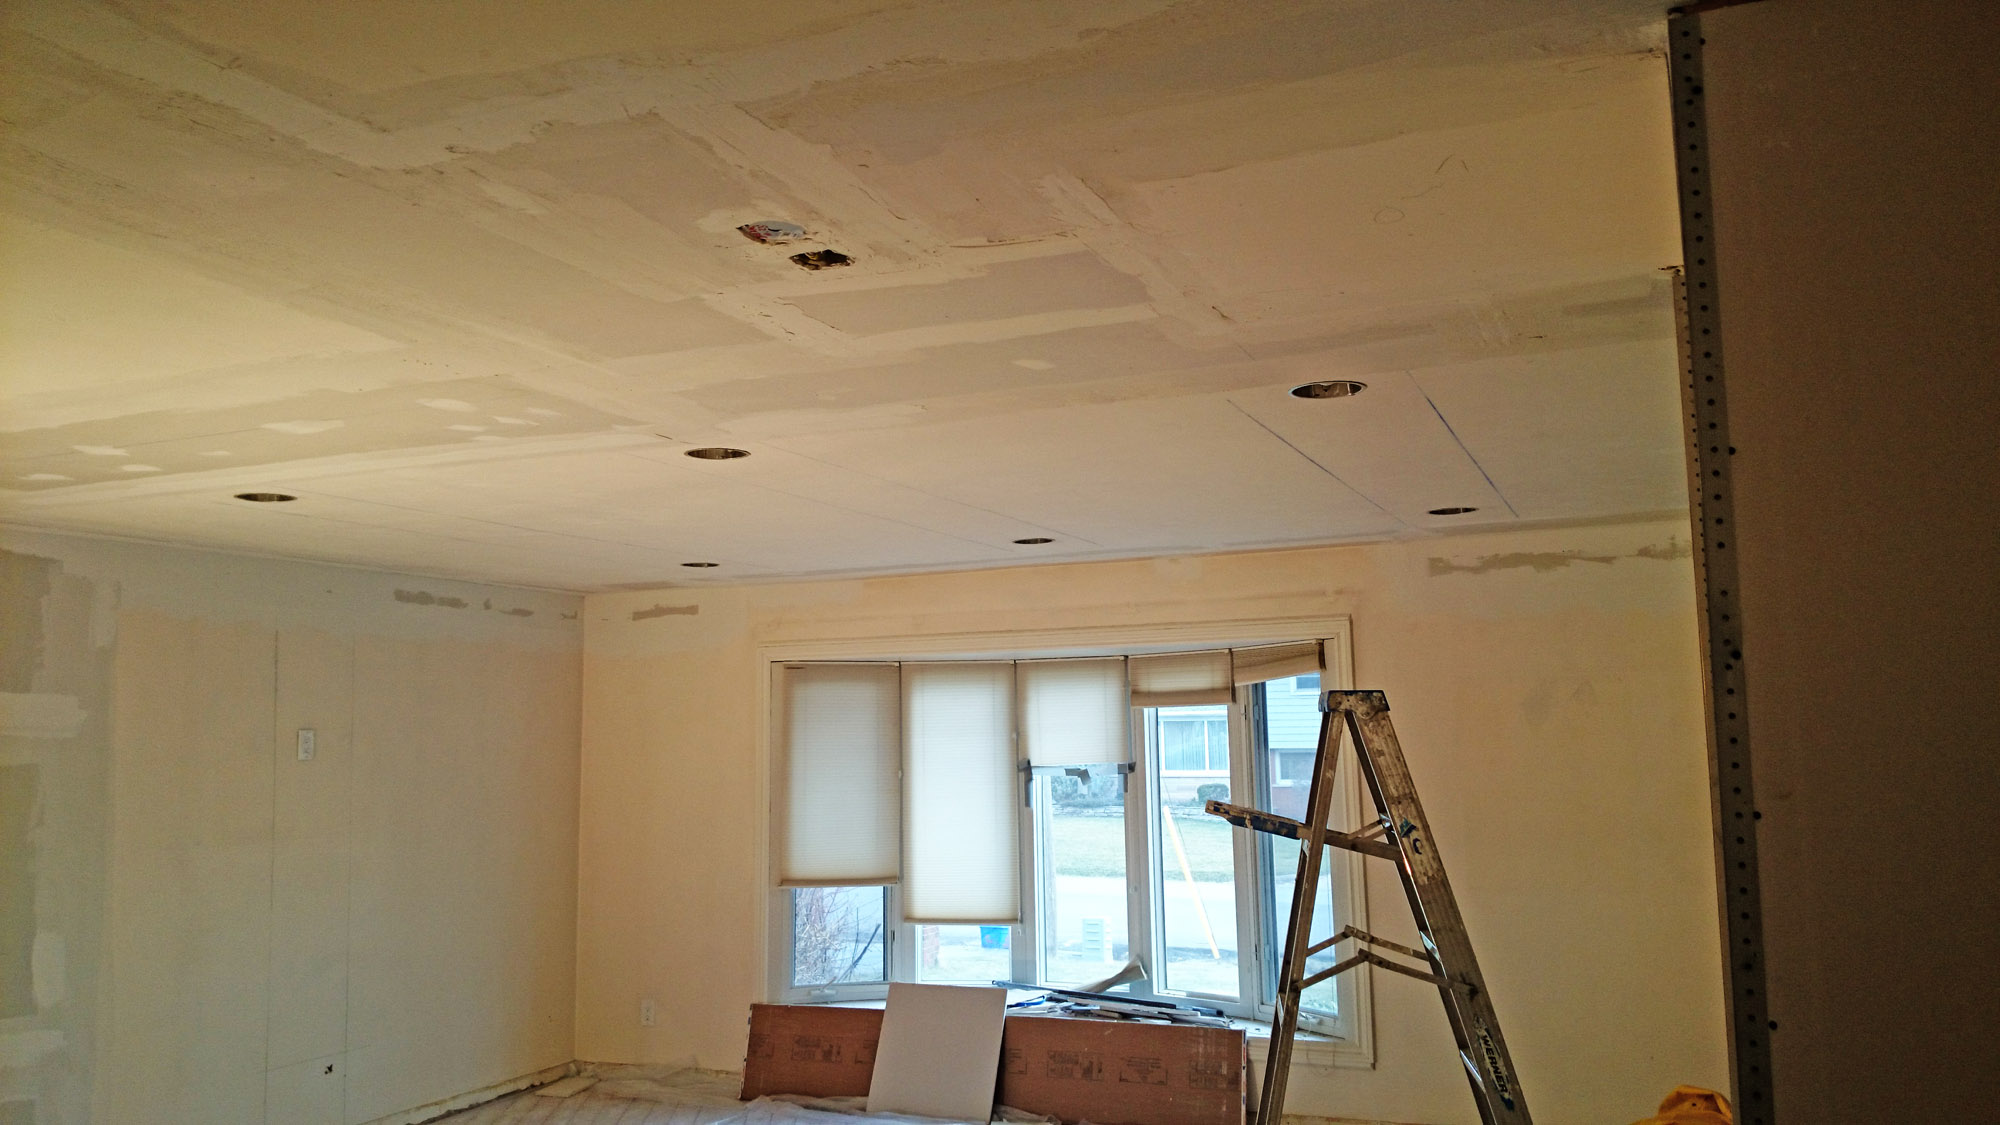 A ceiling gets new drywall as part of a restoration project in Hamilton by Moncast